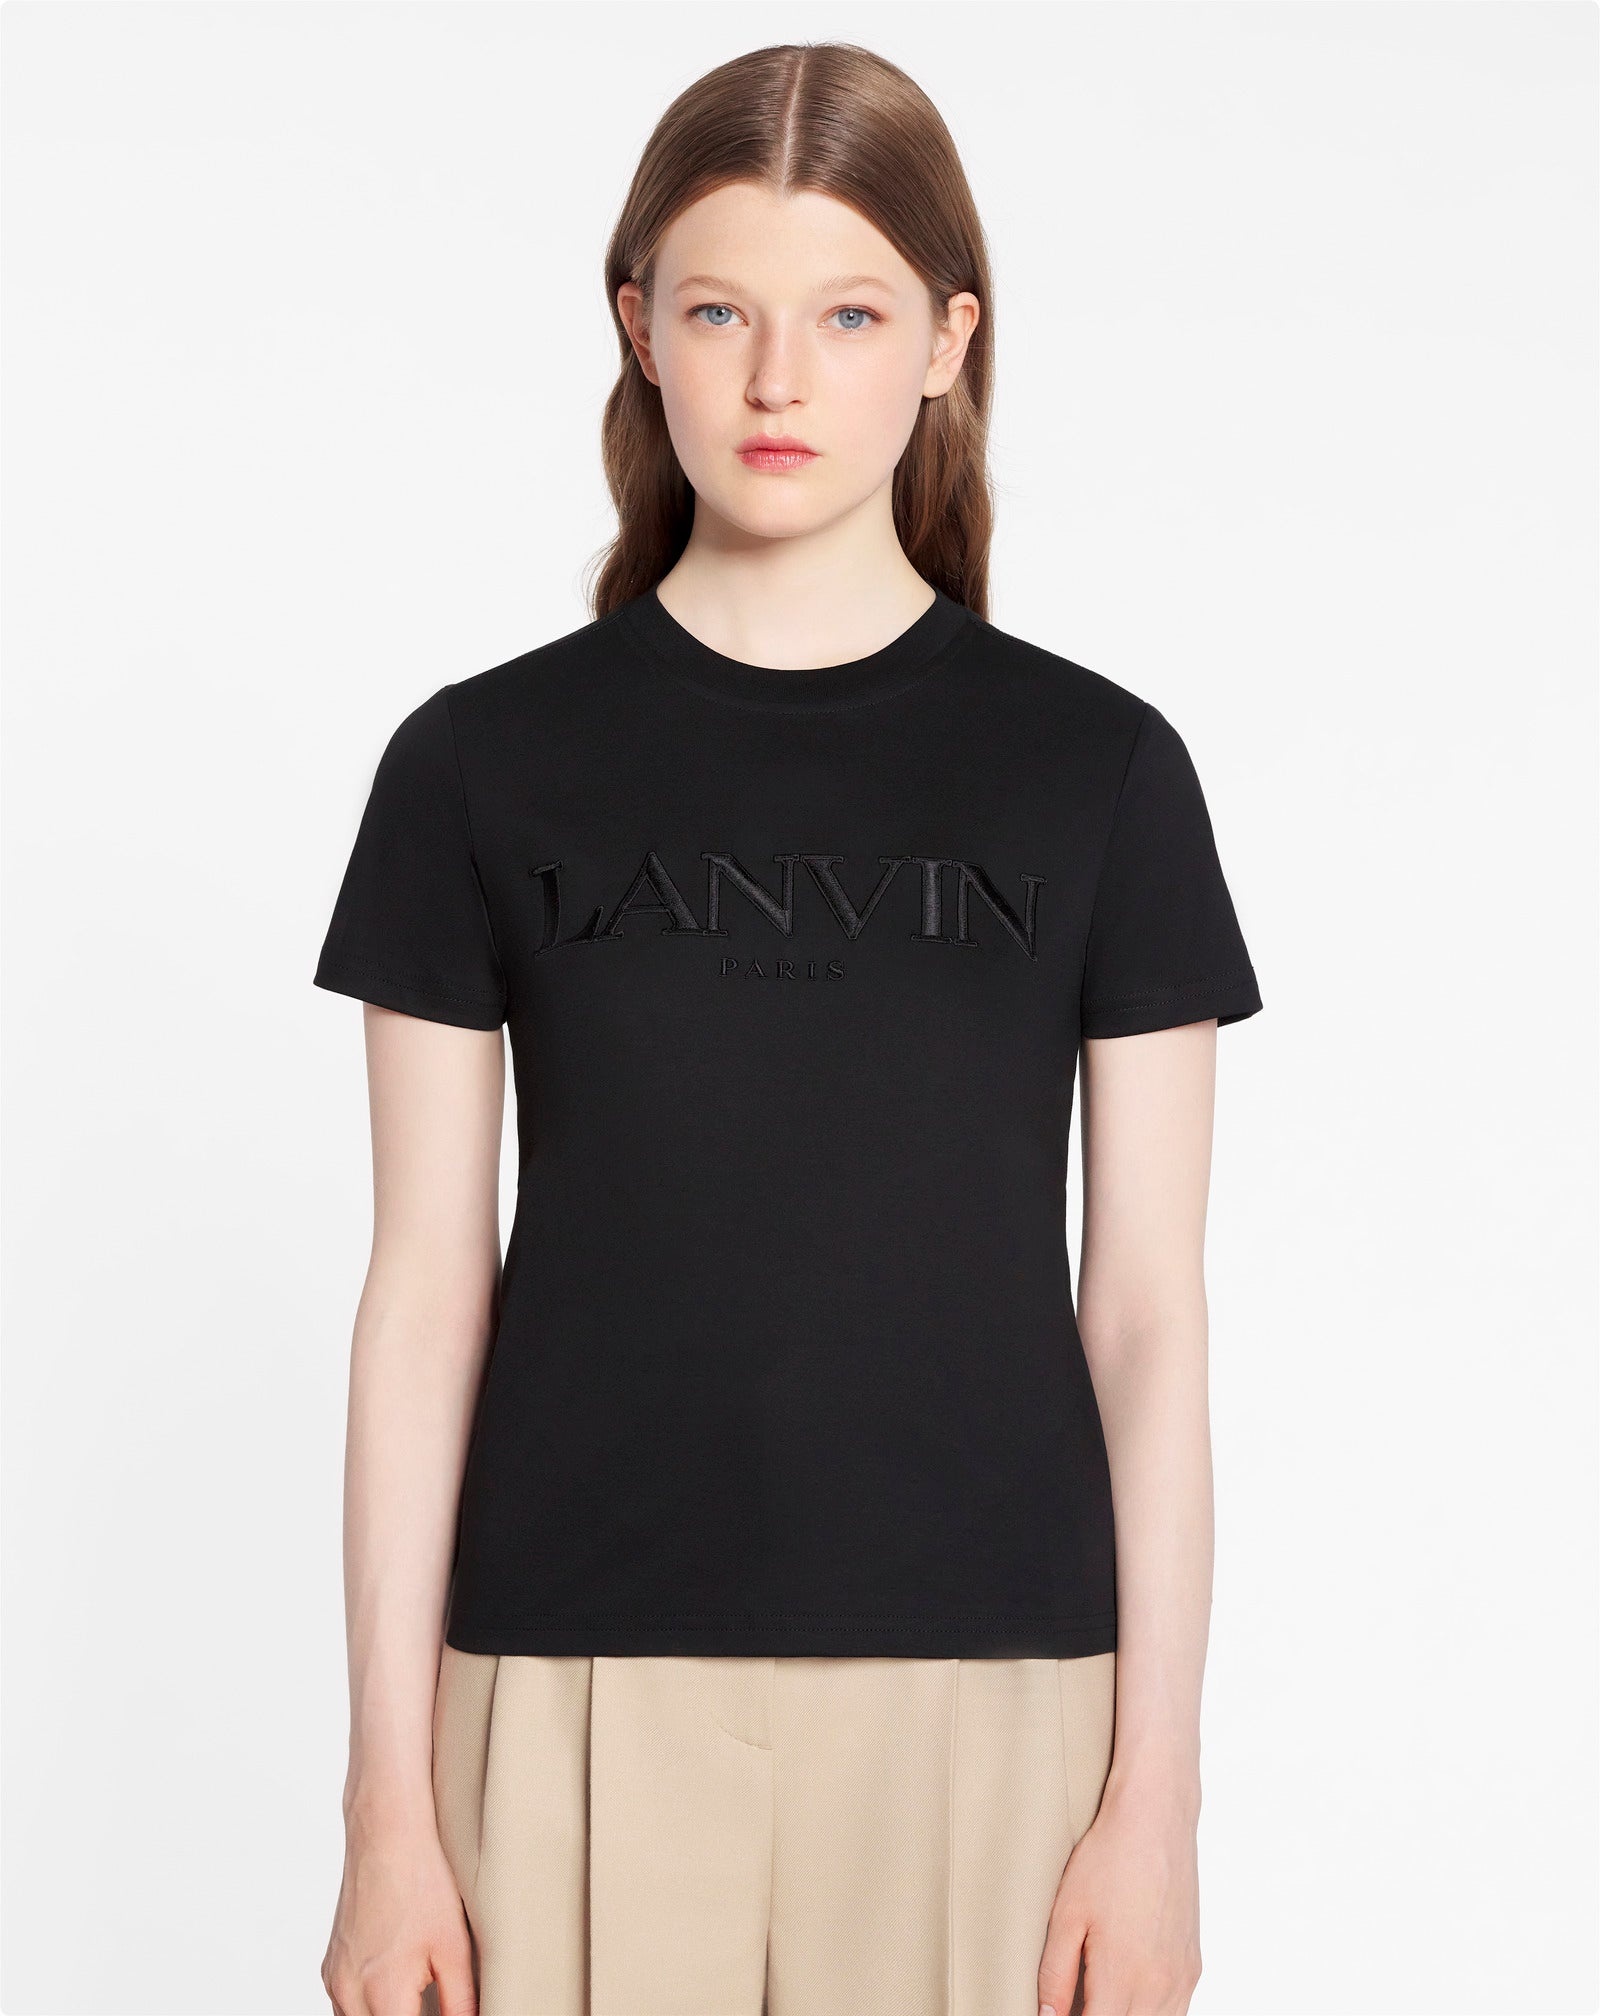 CLASSIC FIT LANVIN EMBROIDERED T-SHIRT - 3